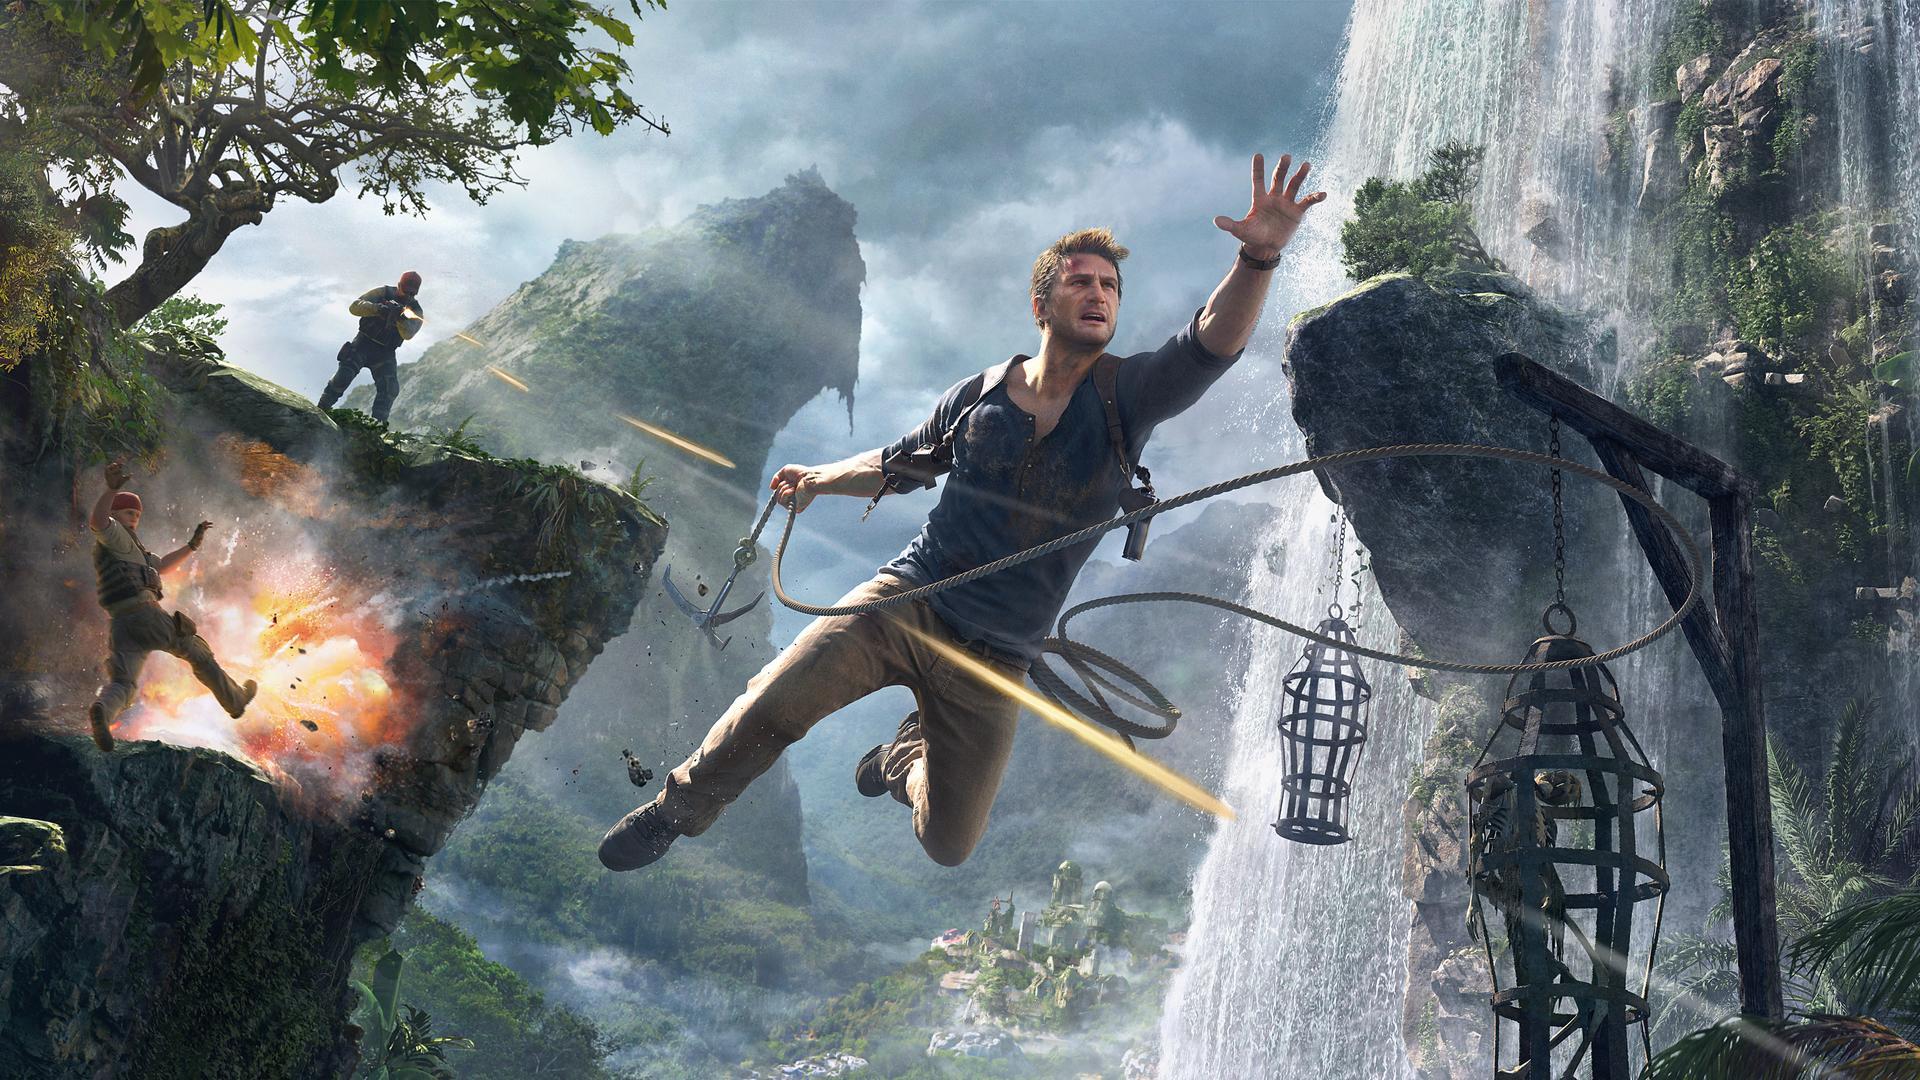 Drake's jump Wallpaper from Uncharted 4: A Thief's End